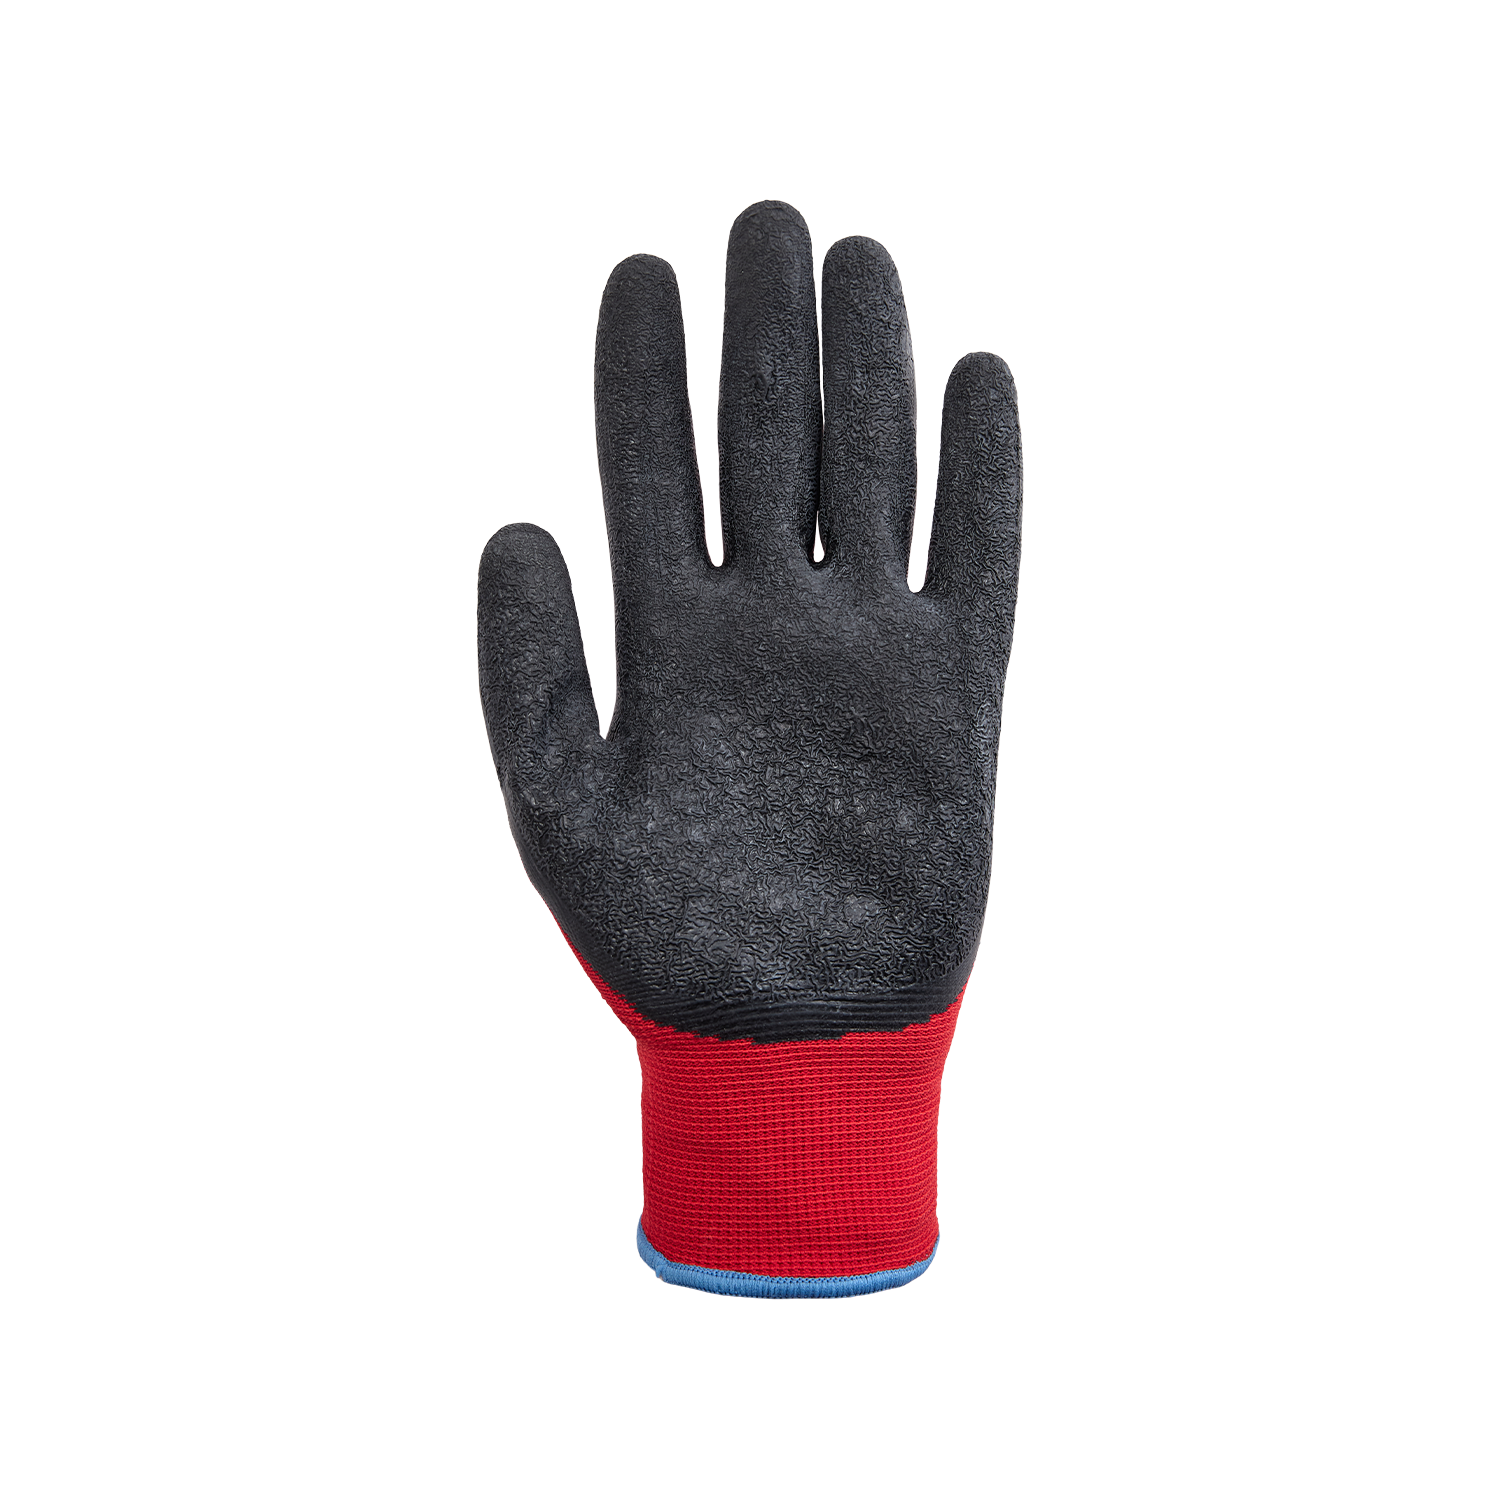 NORSE PowerGrip assembly gloves size 7